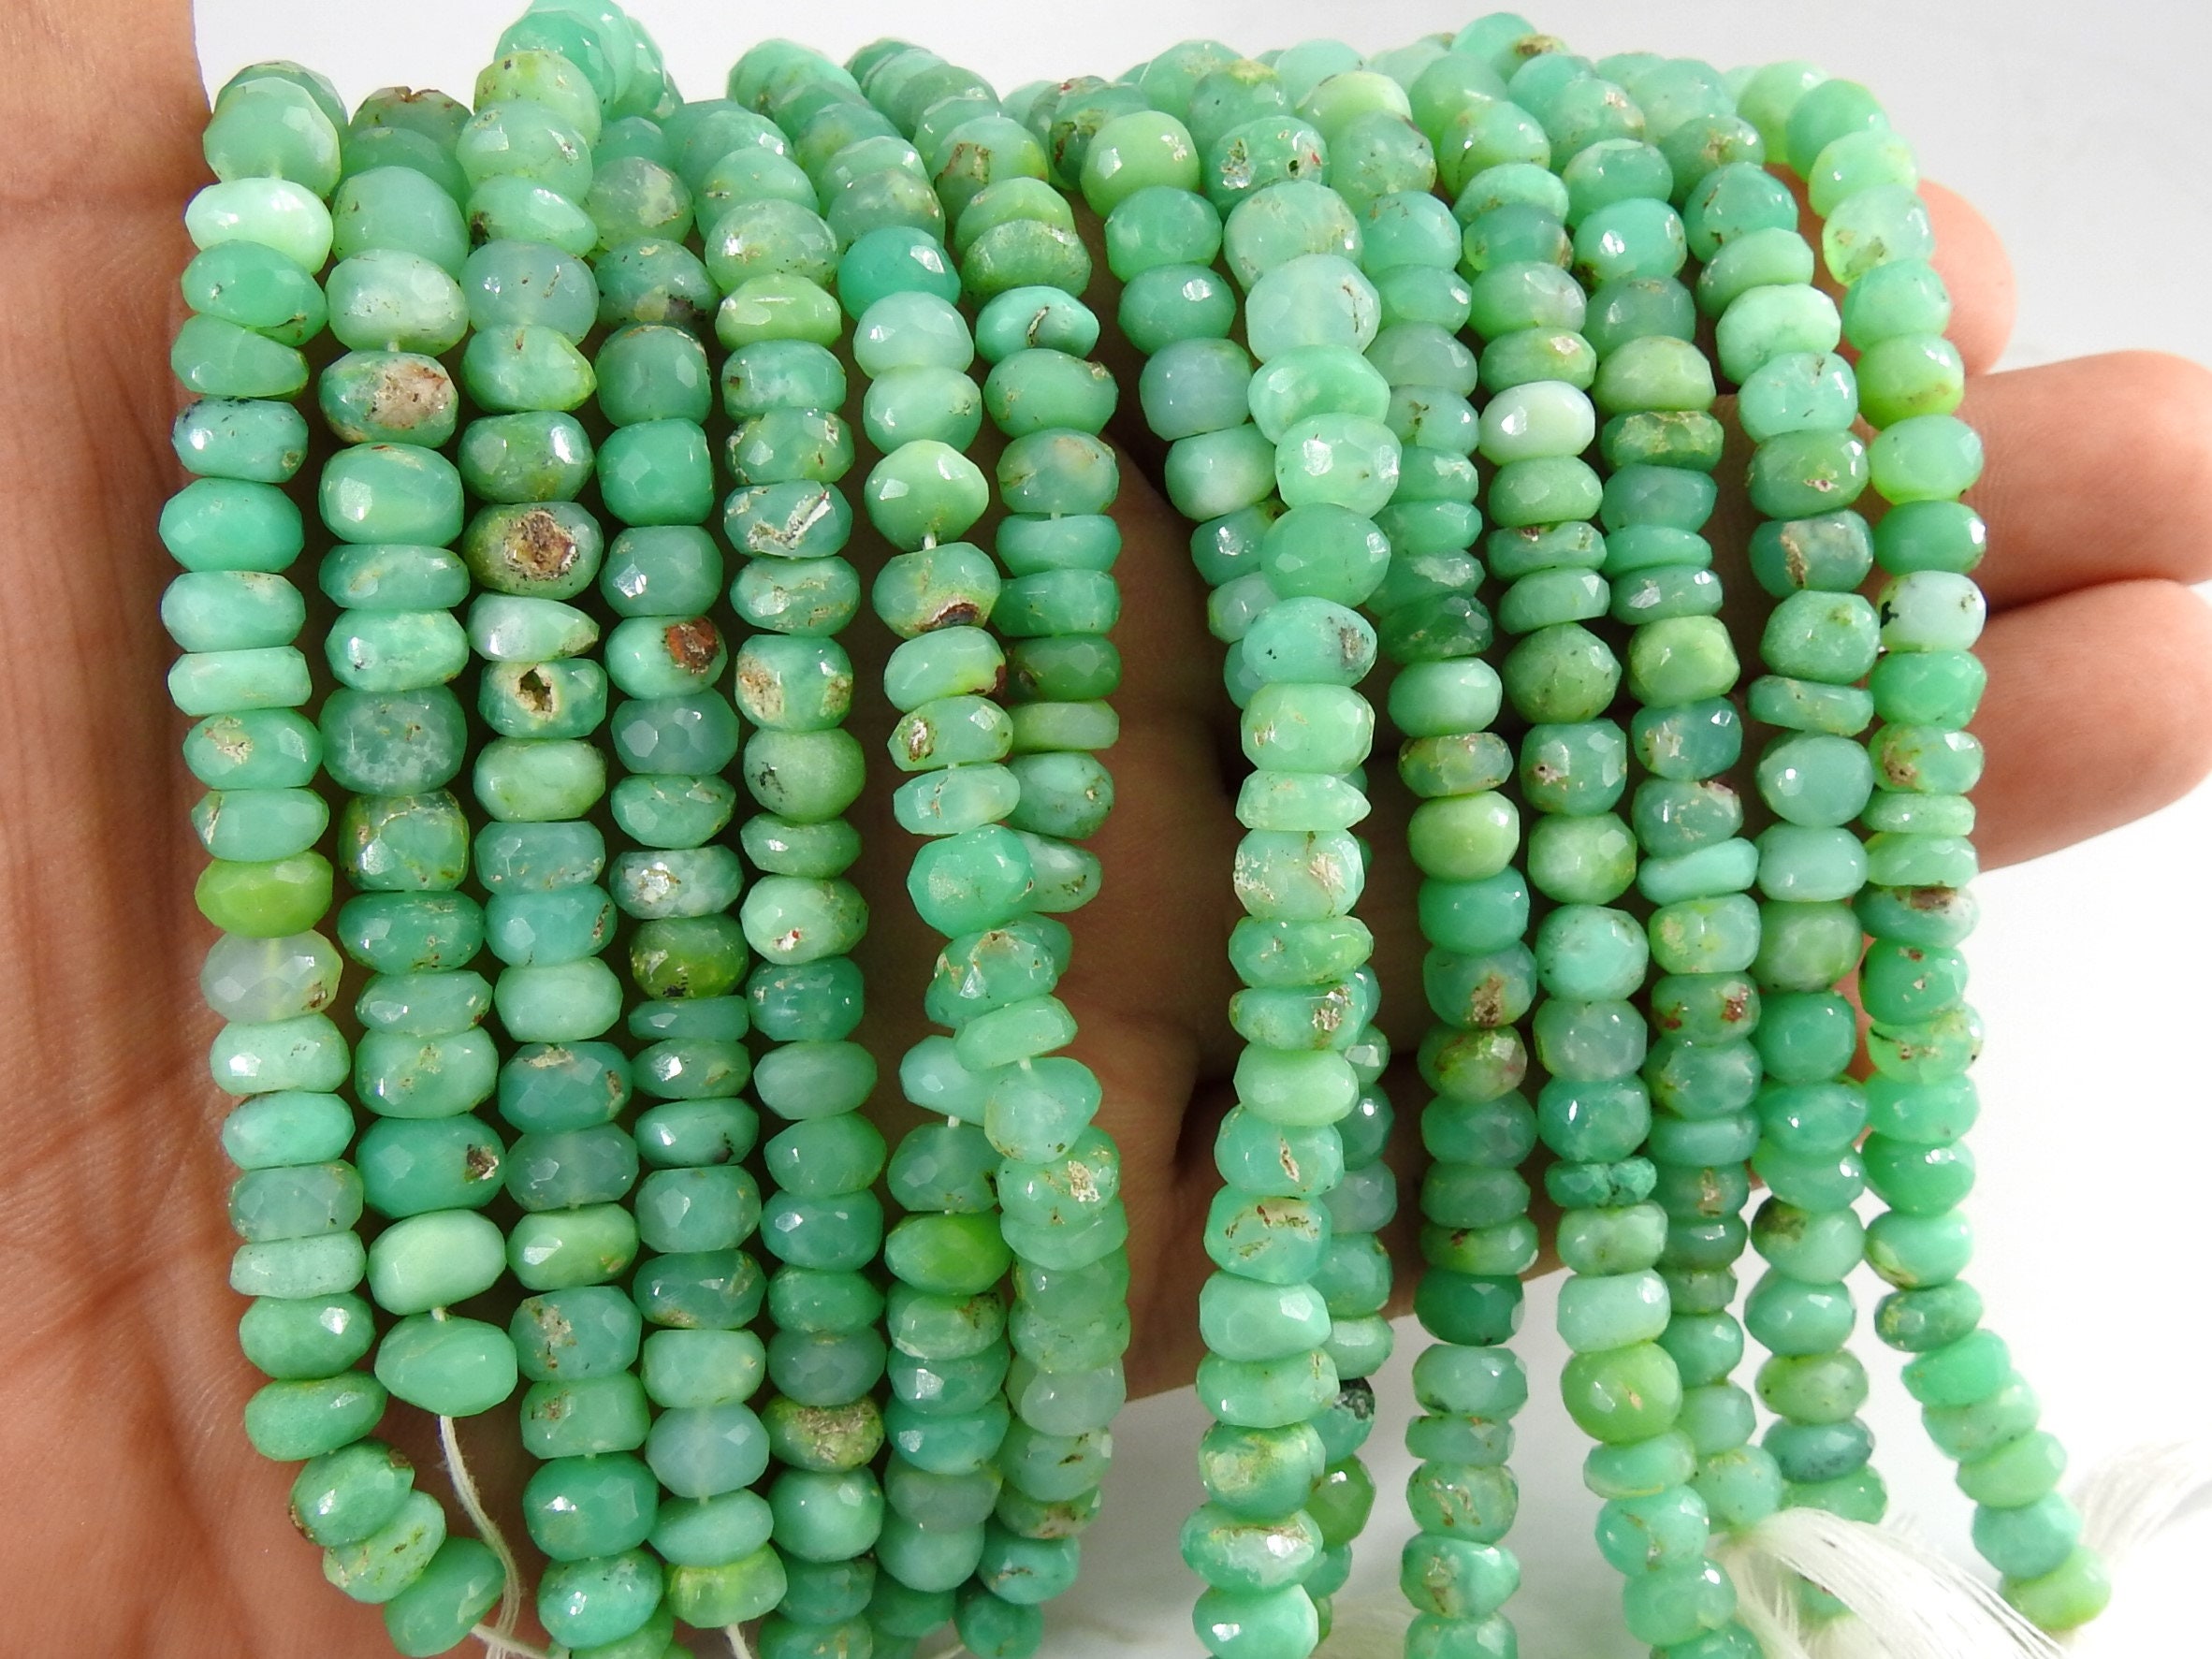 Chrysoprase Faceted Roundel Beads,Handmade,Loose Stone,For Making Jewelry,Necklace,Wholesaler,Supplies,13Inch 7X8MM,100%Natural PME-B4 | Save 33% - Rajasthan Living 14